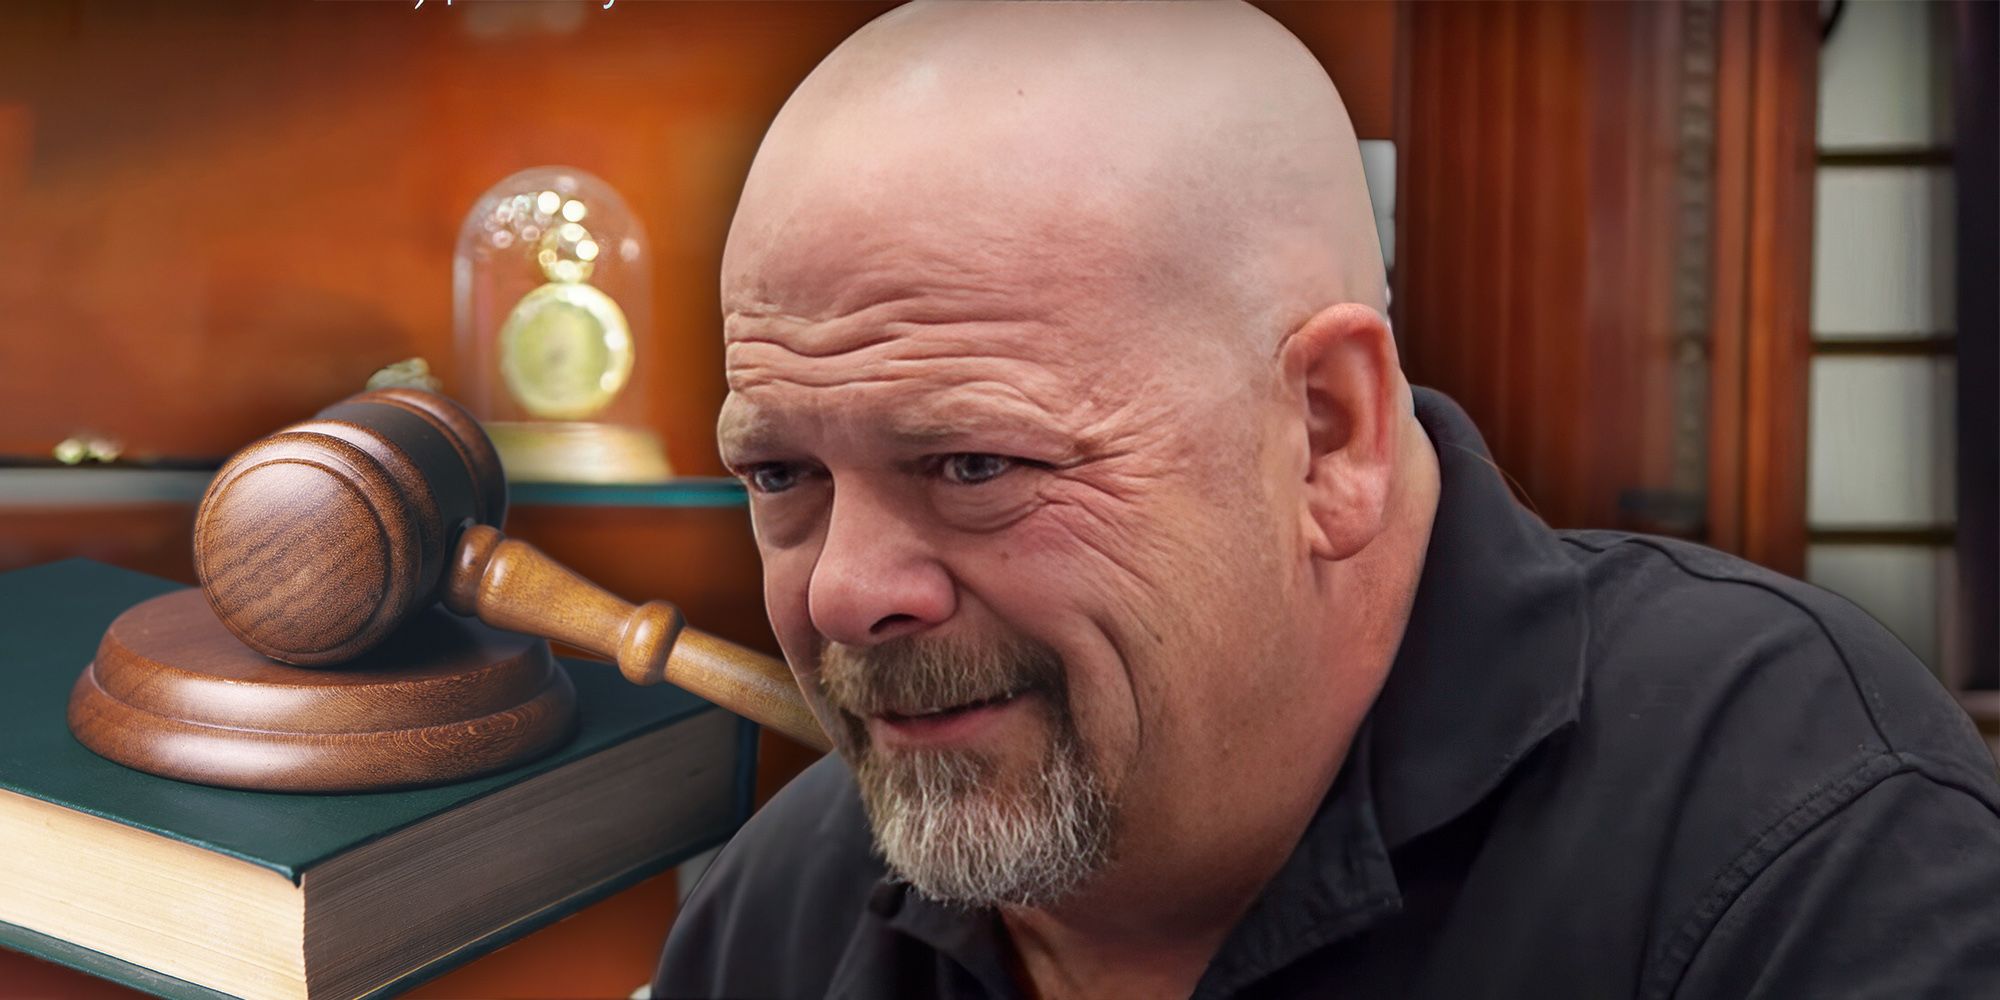 Pawn Stars Rick Harrison wearing a black shirt with a pained expression in a fake courtroom